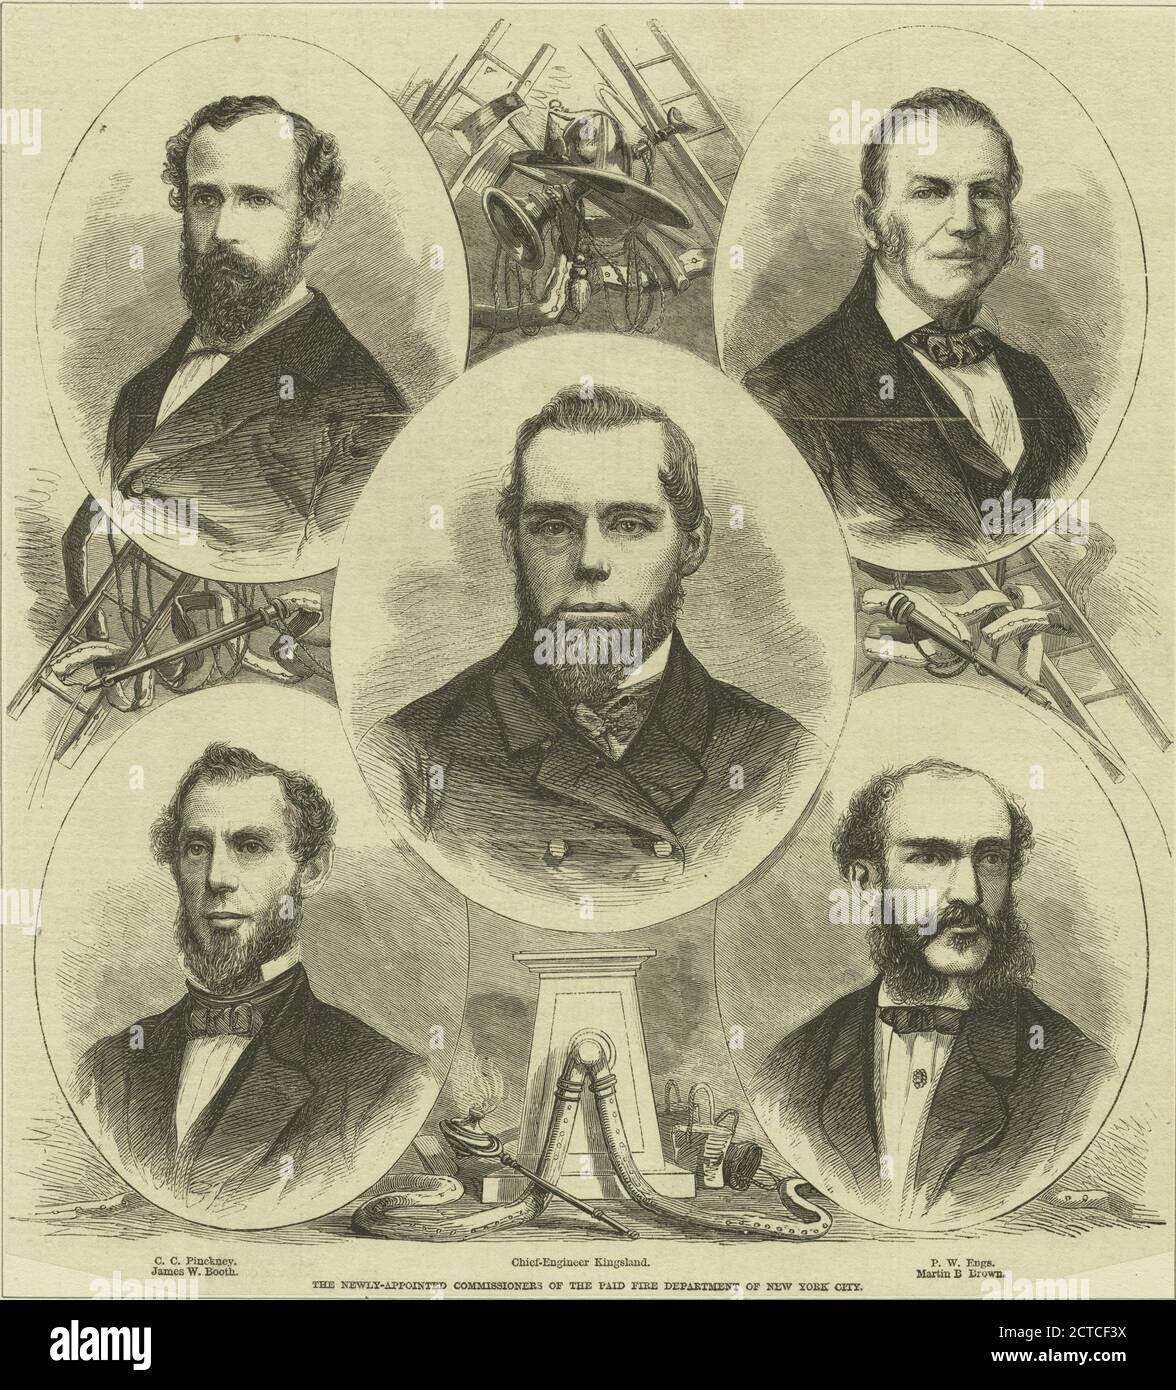 The newly-appointed commissioners of the paid fire department of New York City, still image, Prints, 1861 - 1880 Stock Photo